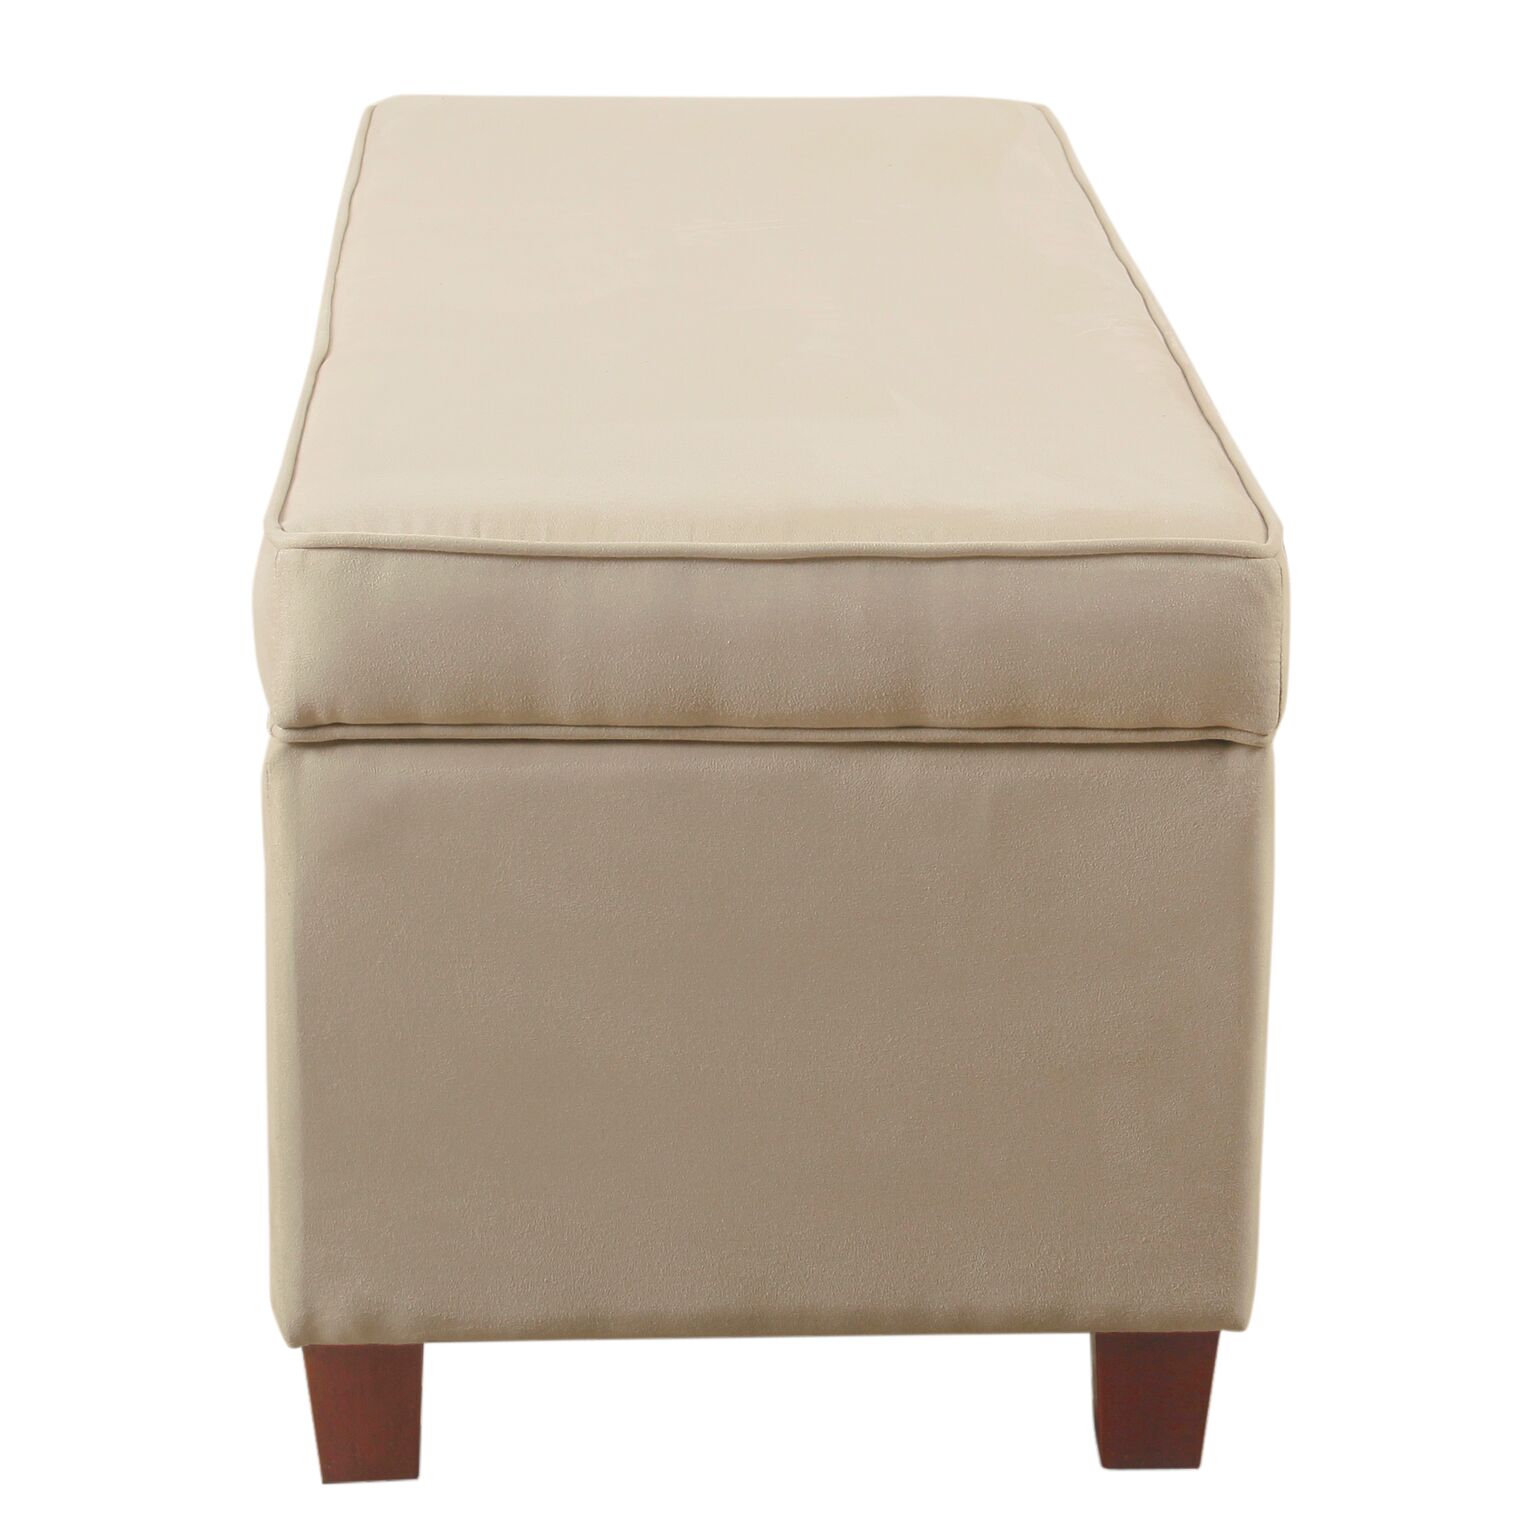 HomePop End of Bed Storage Bench, Cream - image 4 of 6